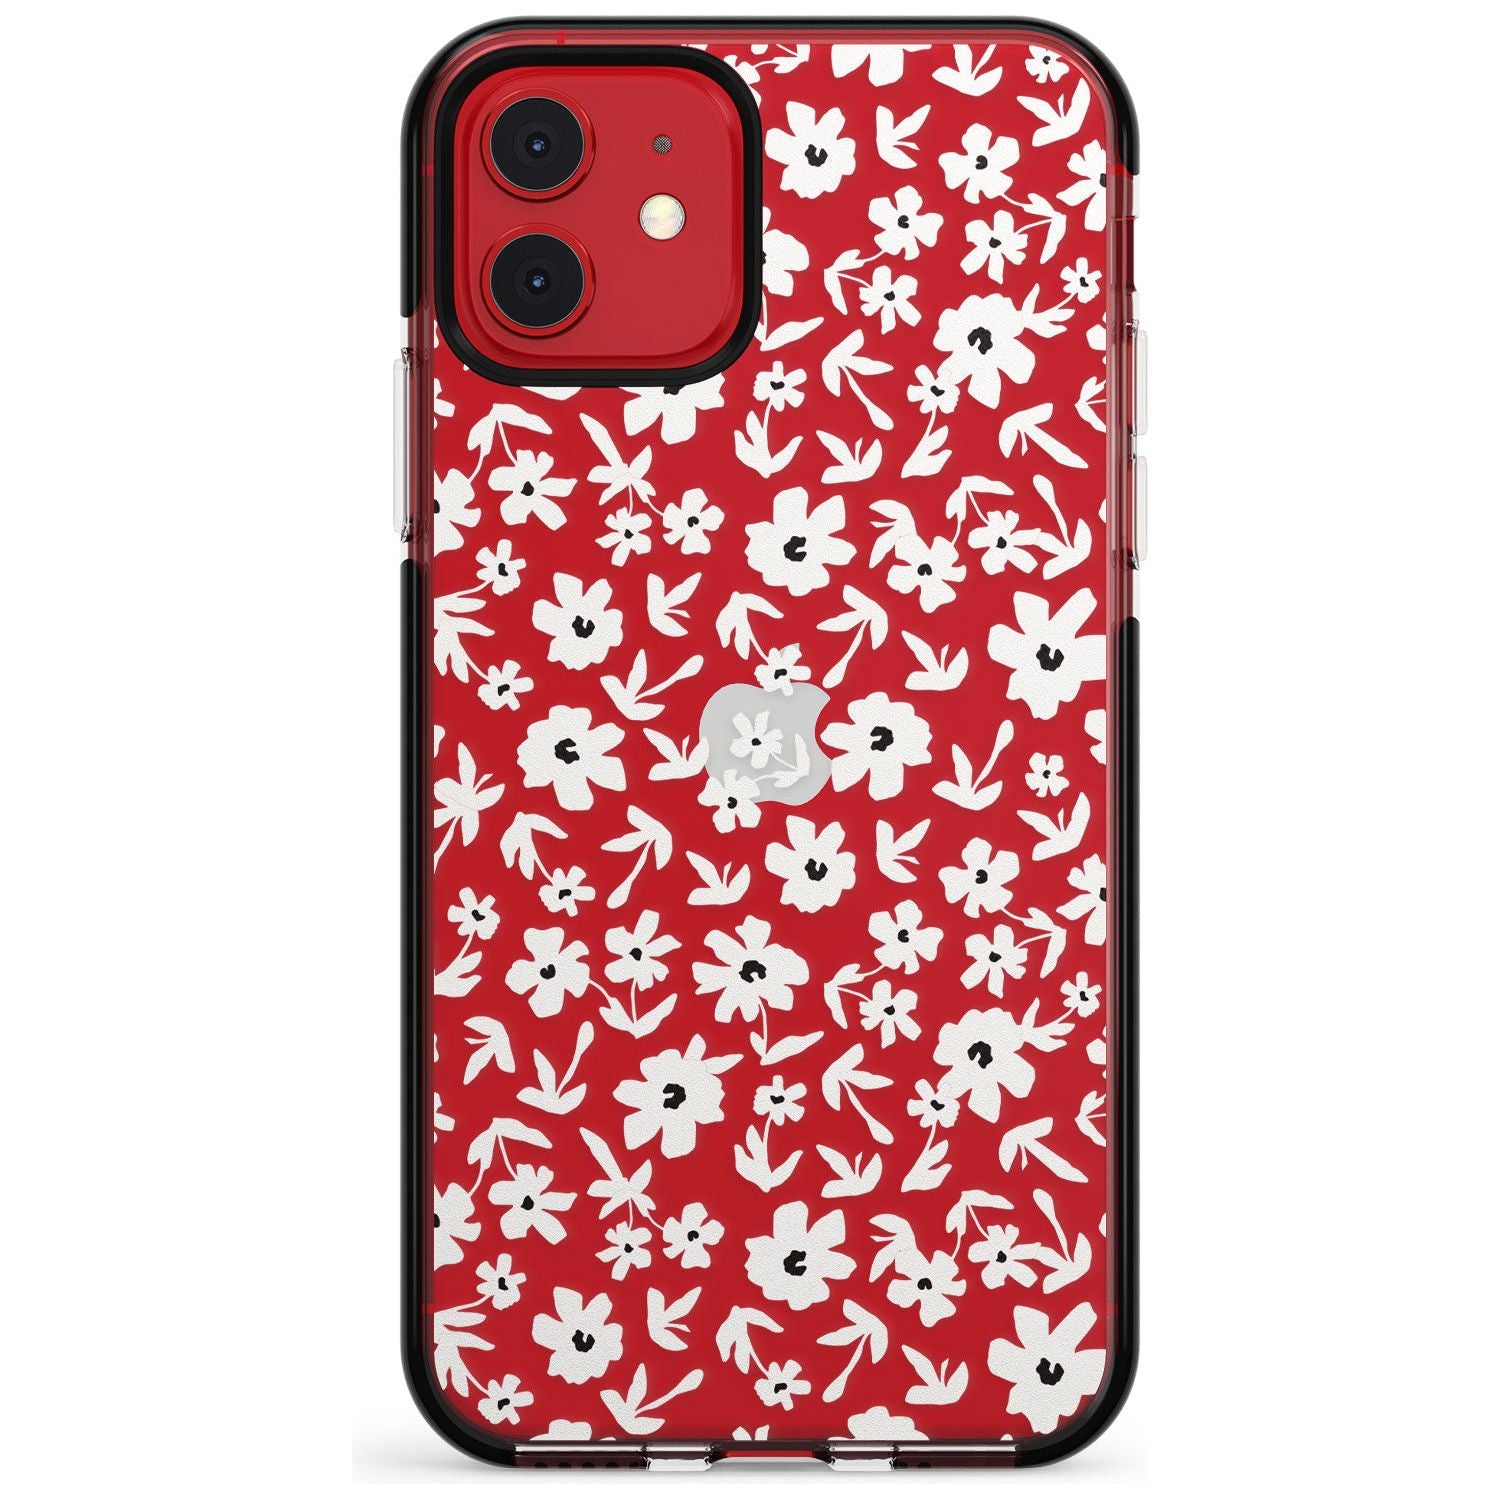 Floral Print on Clear - Cute Floral Design Pink Fade Impact Phone Case for iPhone 11 Pro Max